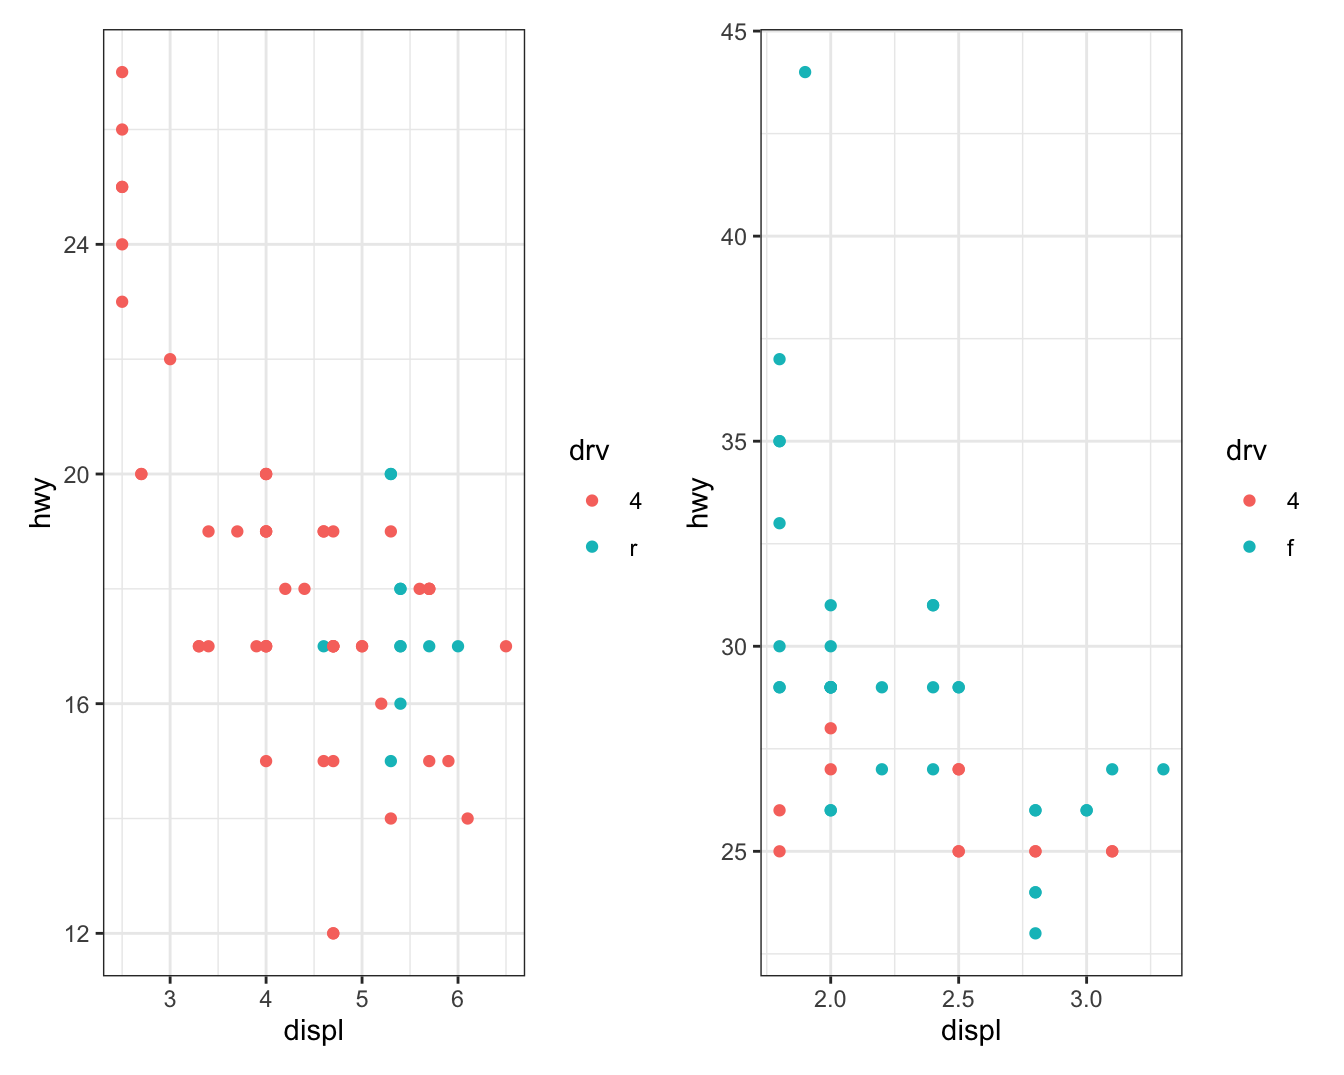 On the left, a scatterplot of highway mileage vs. displacement of SUVs.
On the right, a scatterplot of the same variables for compact cars.
Points are colored by drive type for both plots. Among SUVs more of
the cars are 4-wheel drive and the others are rear-wheel drive, while
among compact cars more of the cars are front-wheel drive and the others
are 4-wheel drive. SUV plot shows a clear negative relationship
between higway mileage and displacement while in the compact cars plot
the relationship is much flatter.